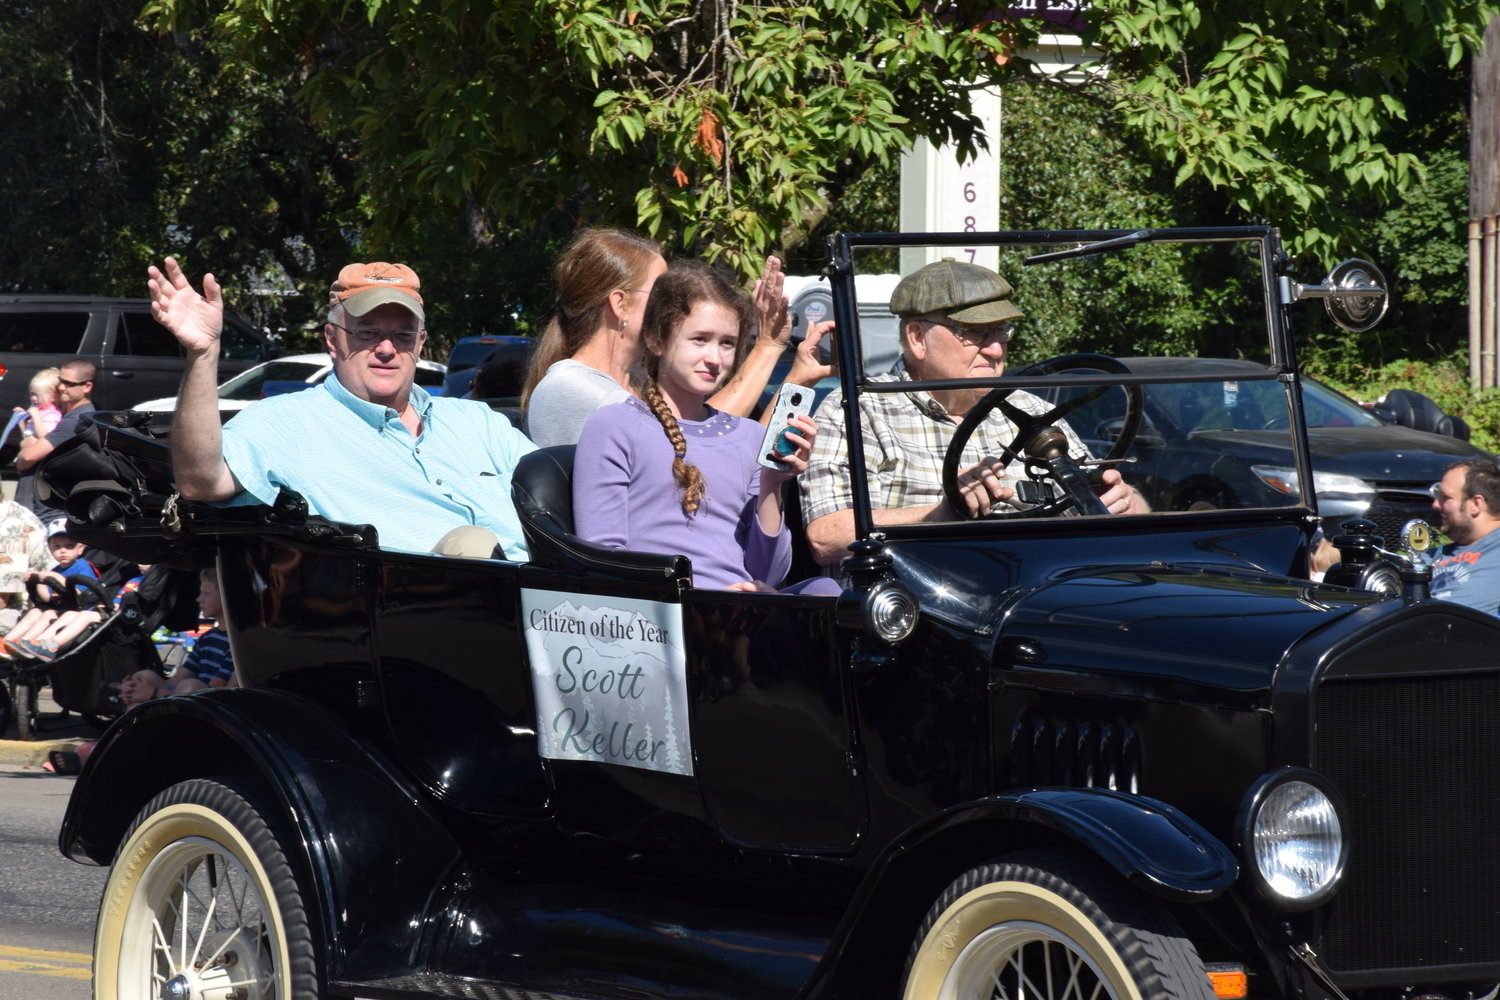 Battle Ground Citizen of the Year Scott Keller, left, rides in a vintage car as one of the first entries in the Battle Ground Harvest Days parade on July 17, 2021.